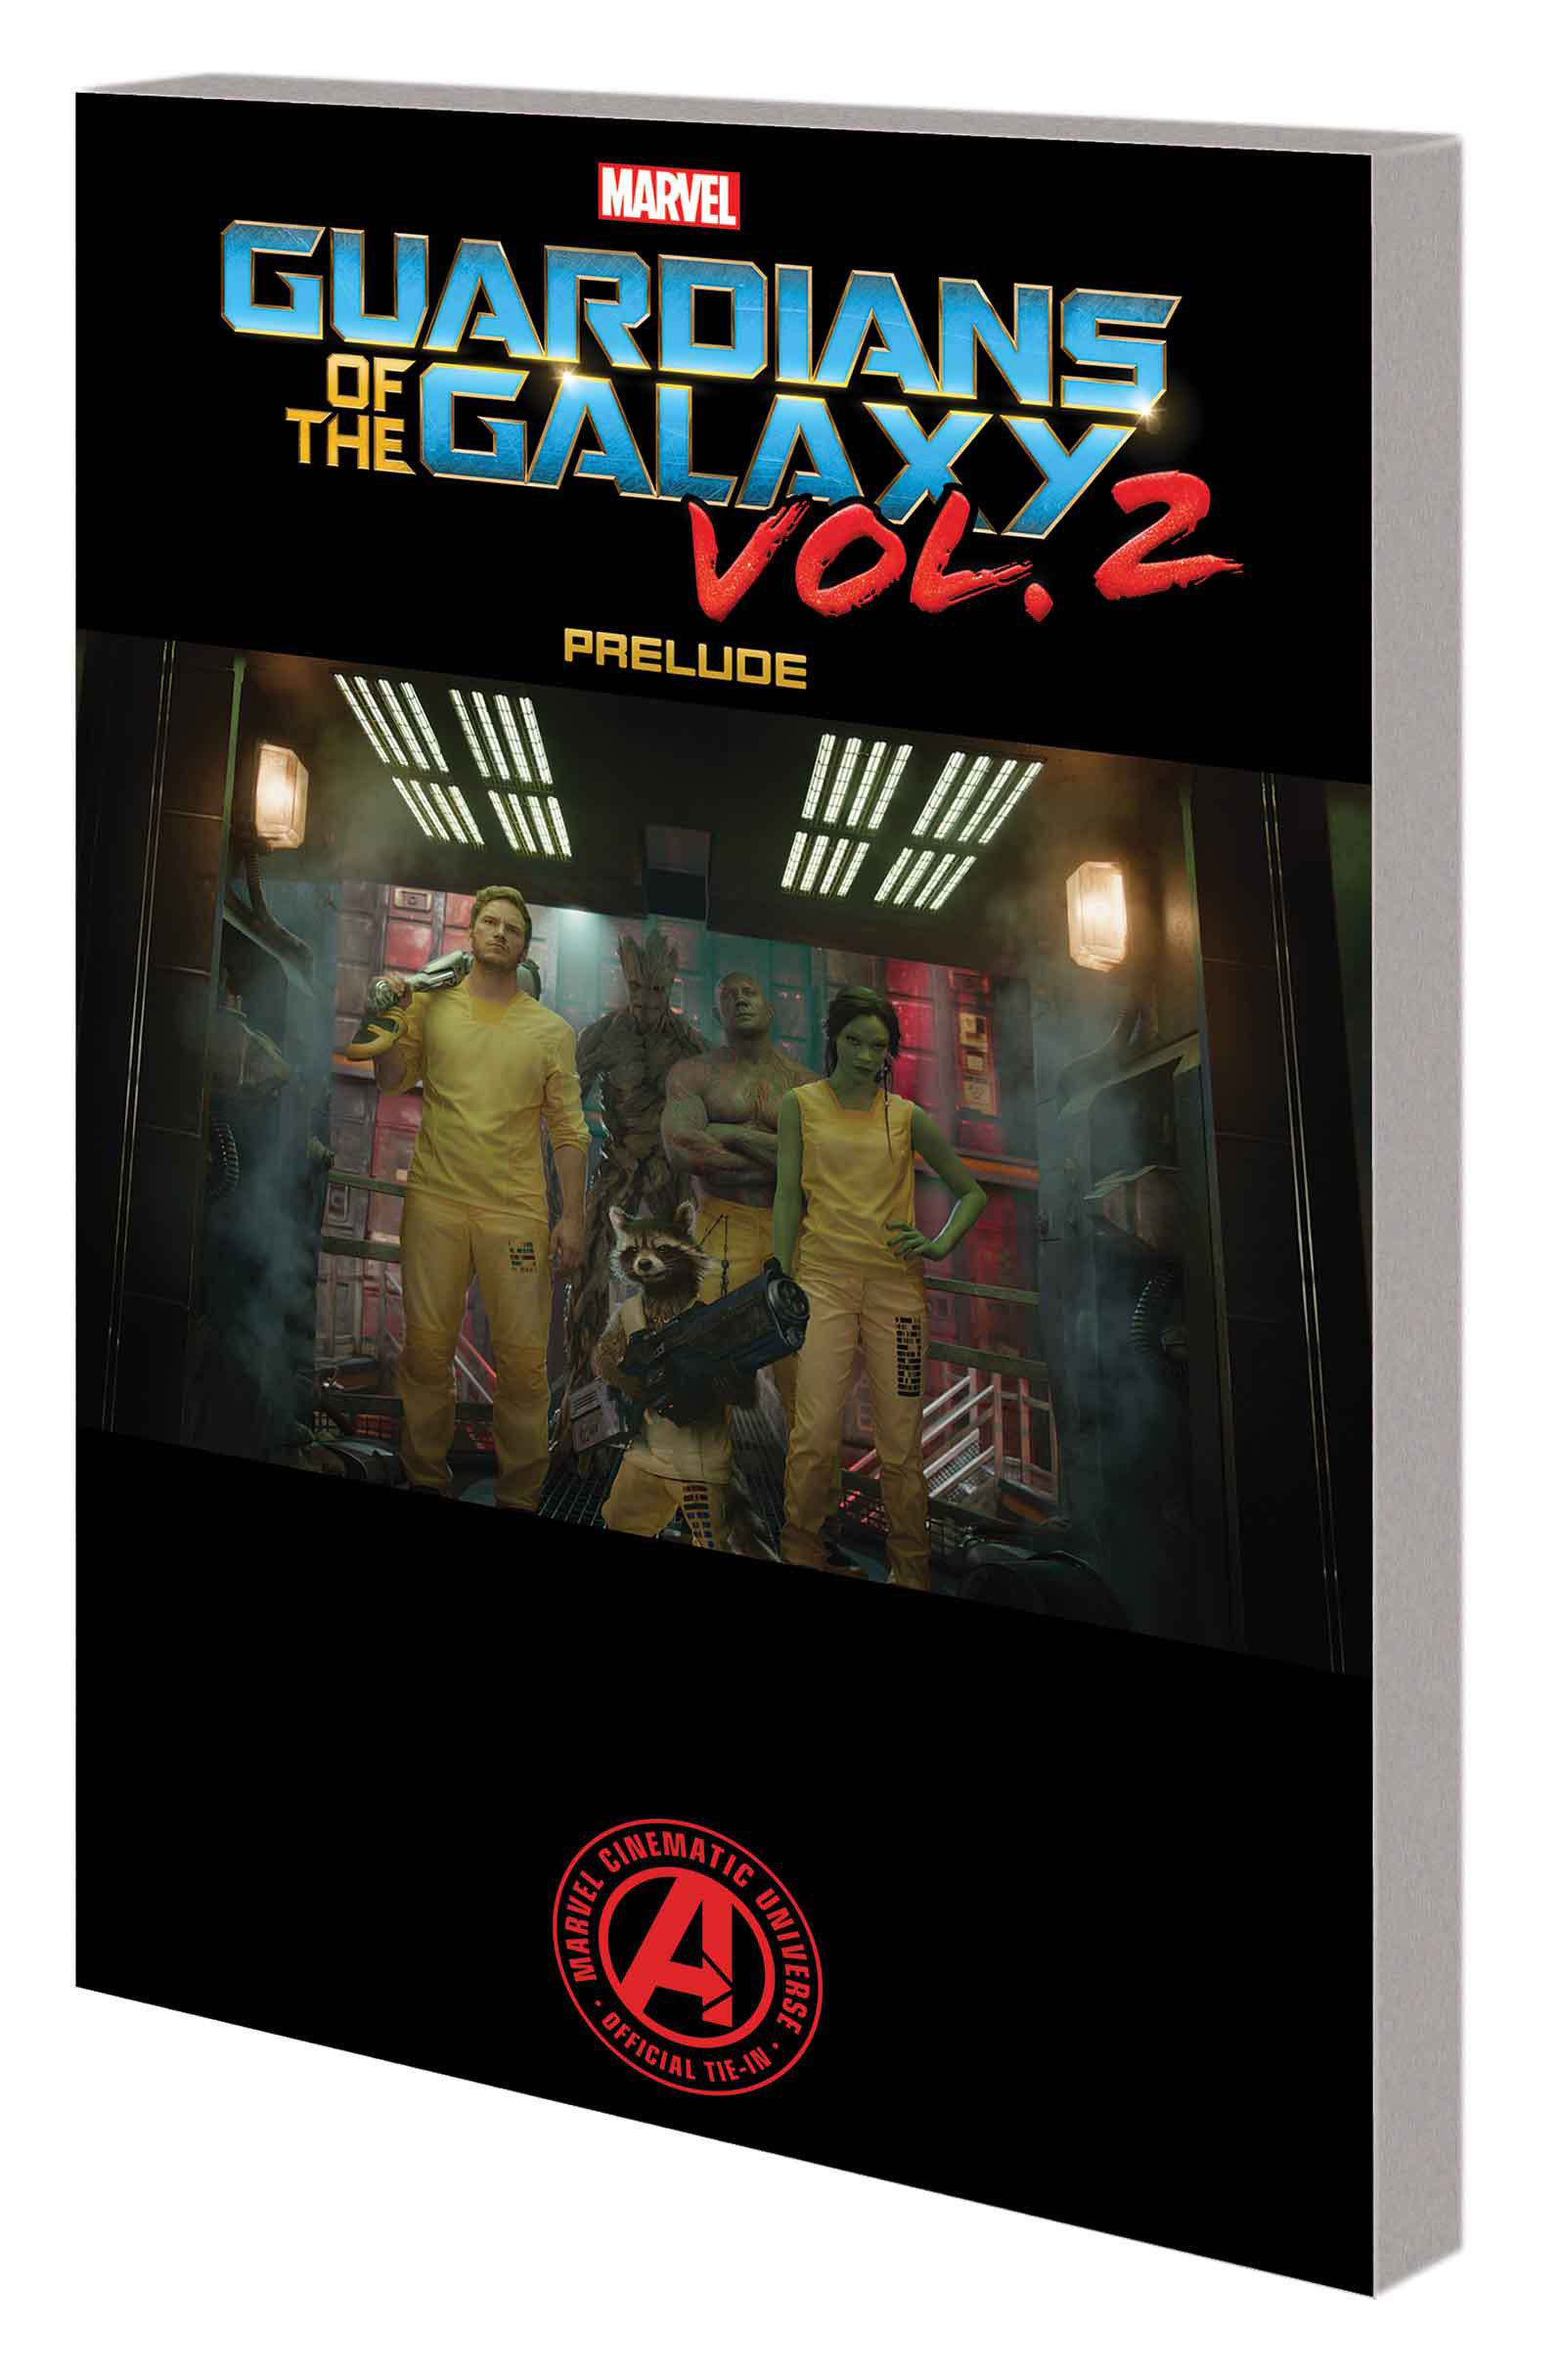 MARVEL’S GUARDIANS OF THE GALAXY VOL. 2 PRELUDE TPB